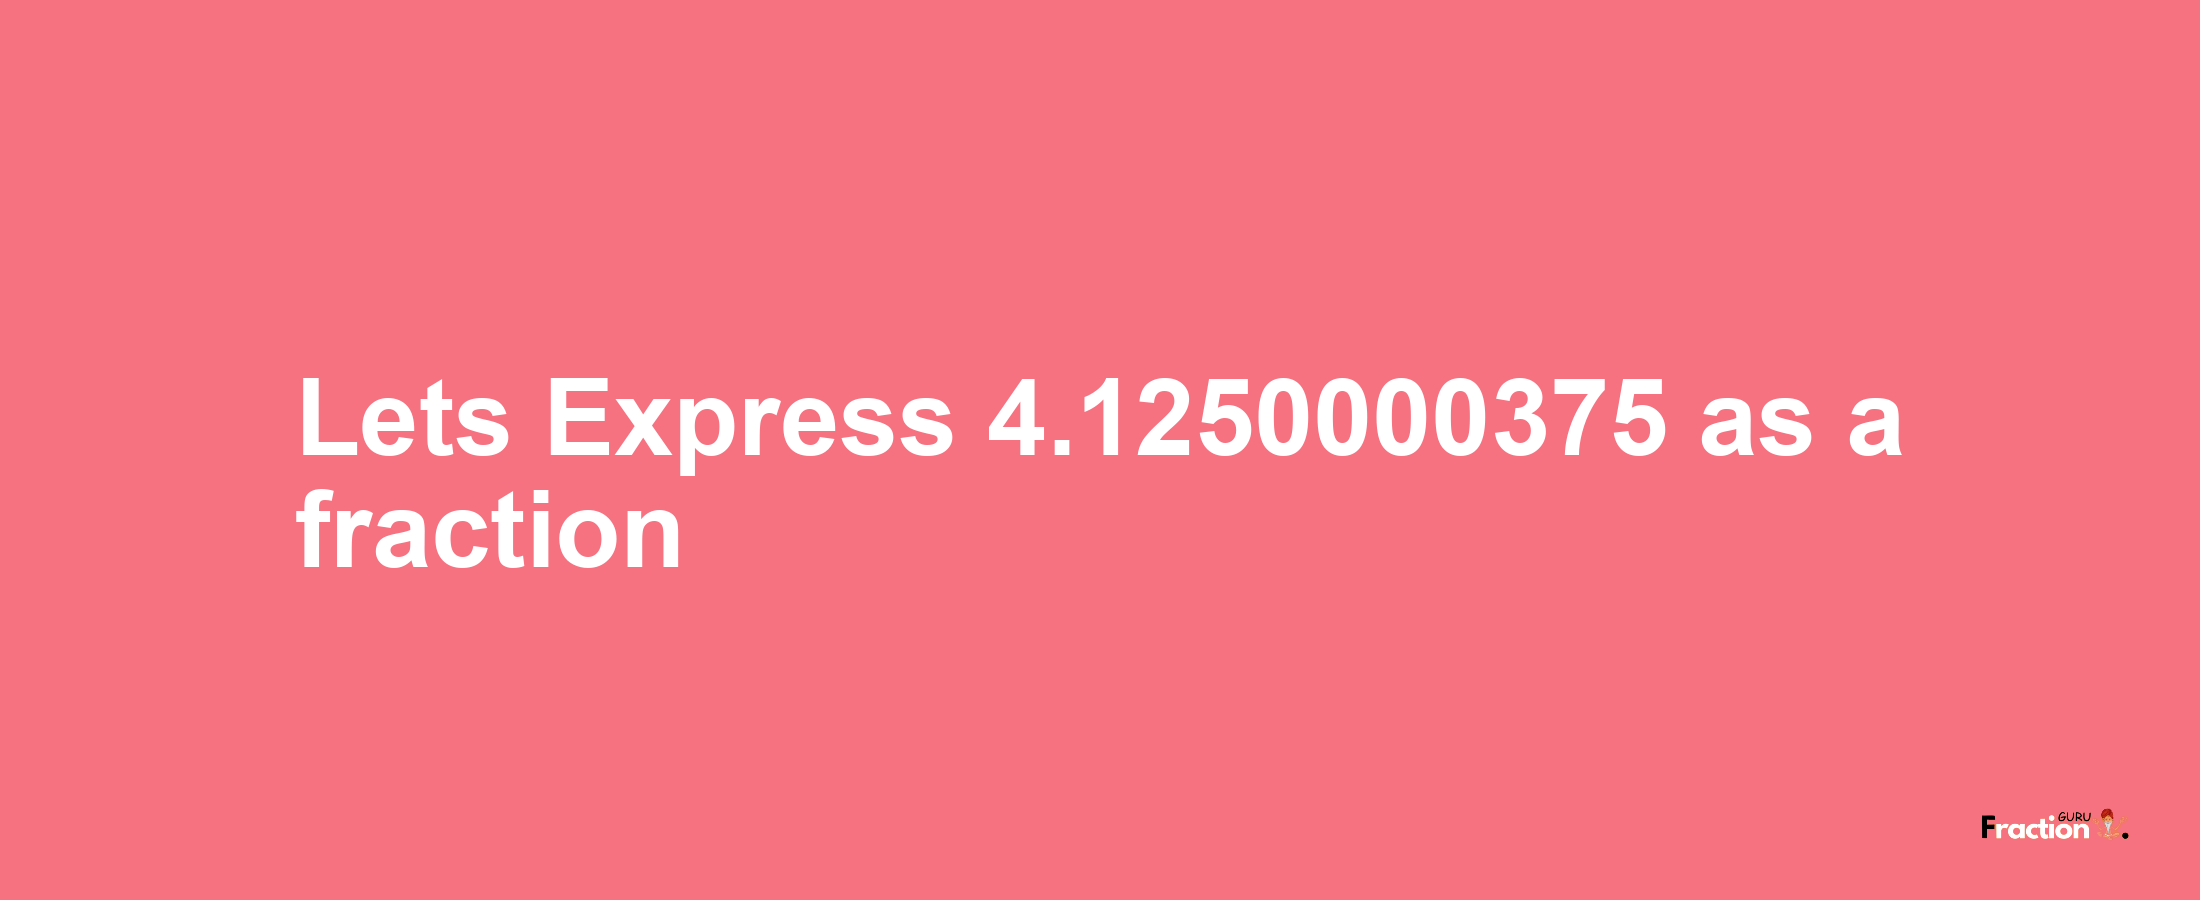 Lets Express 4.1250000375 as afraction